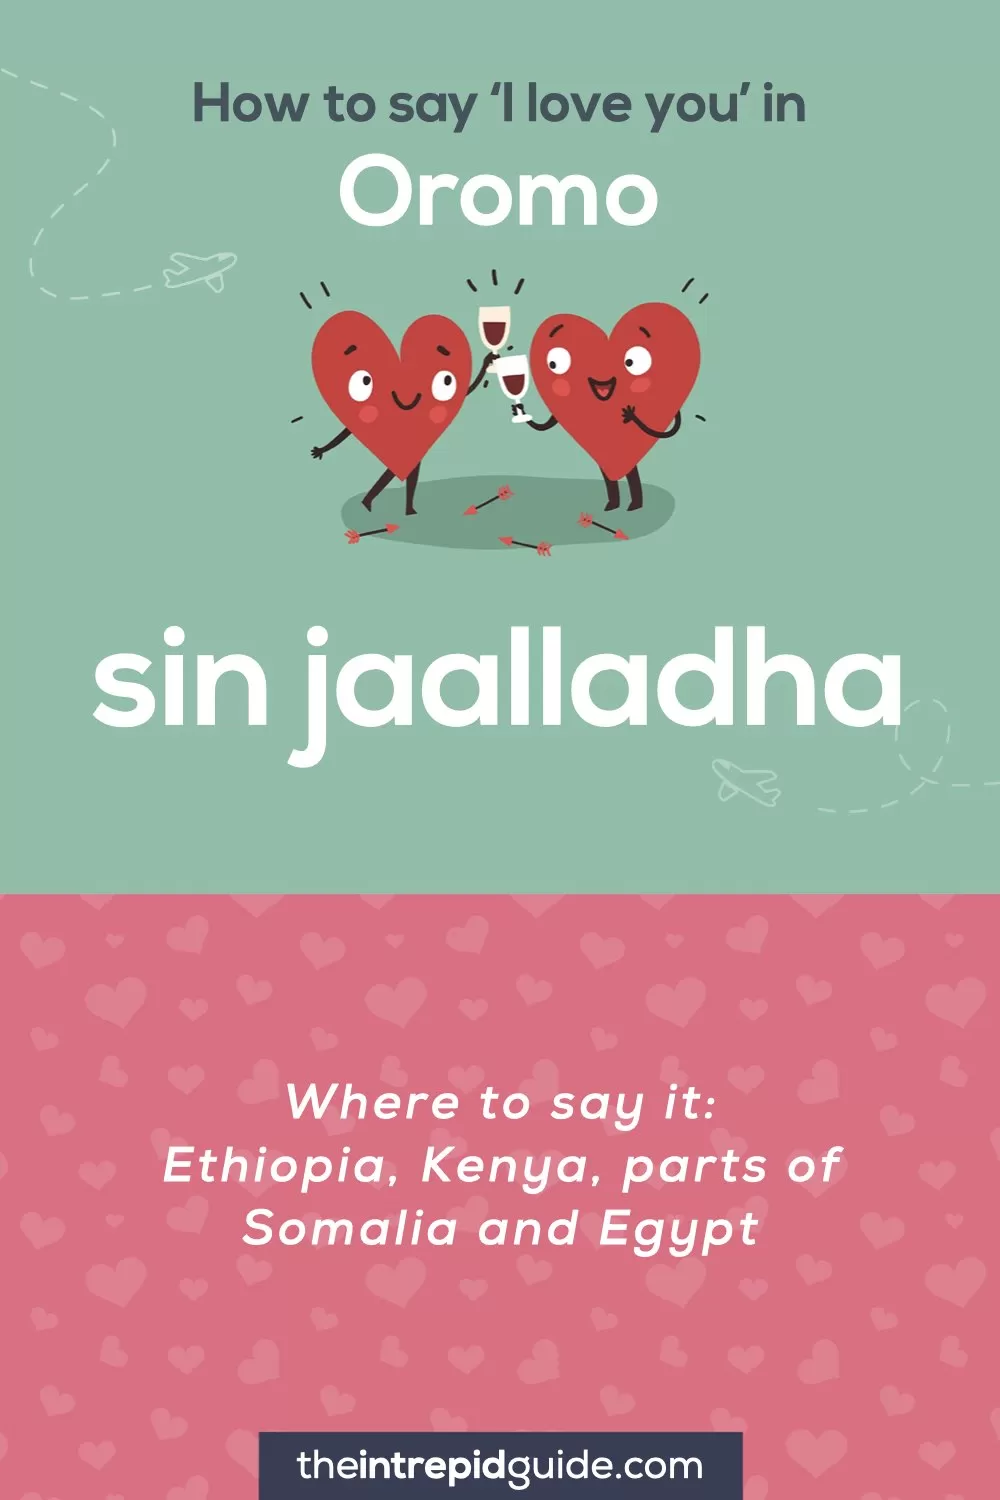 How to say I love you in different languages - Oromo - sin jaalladha